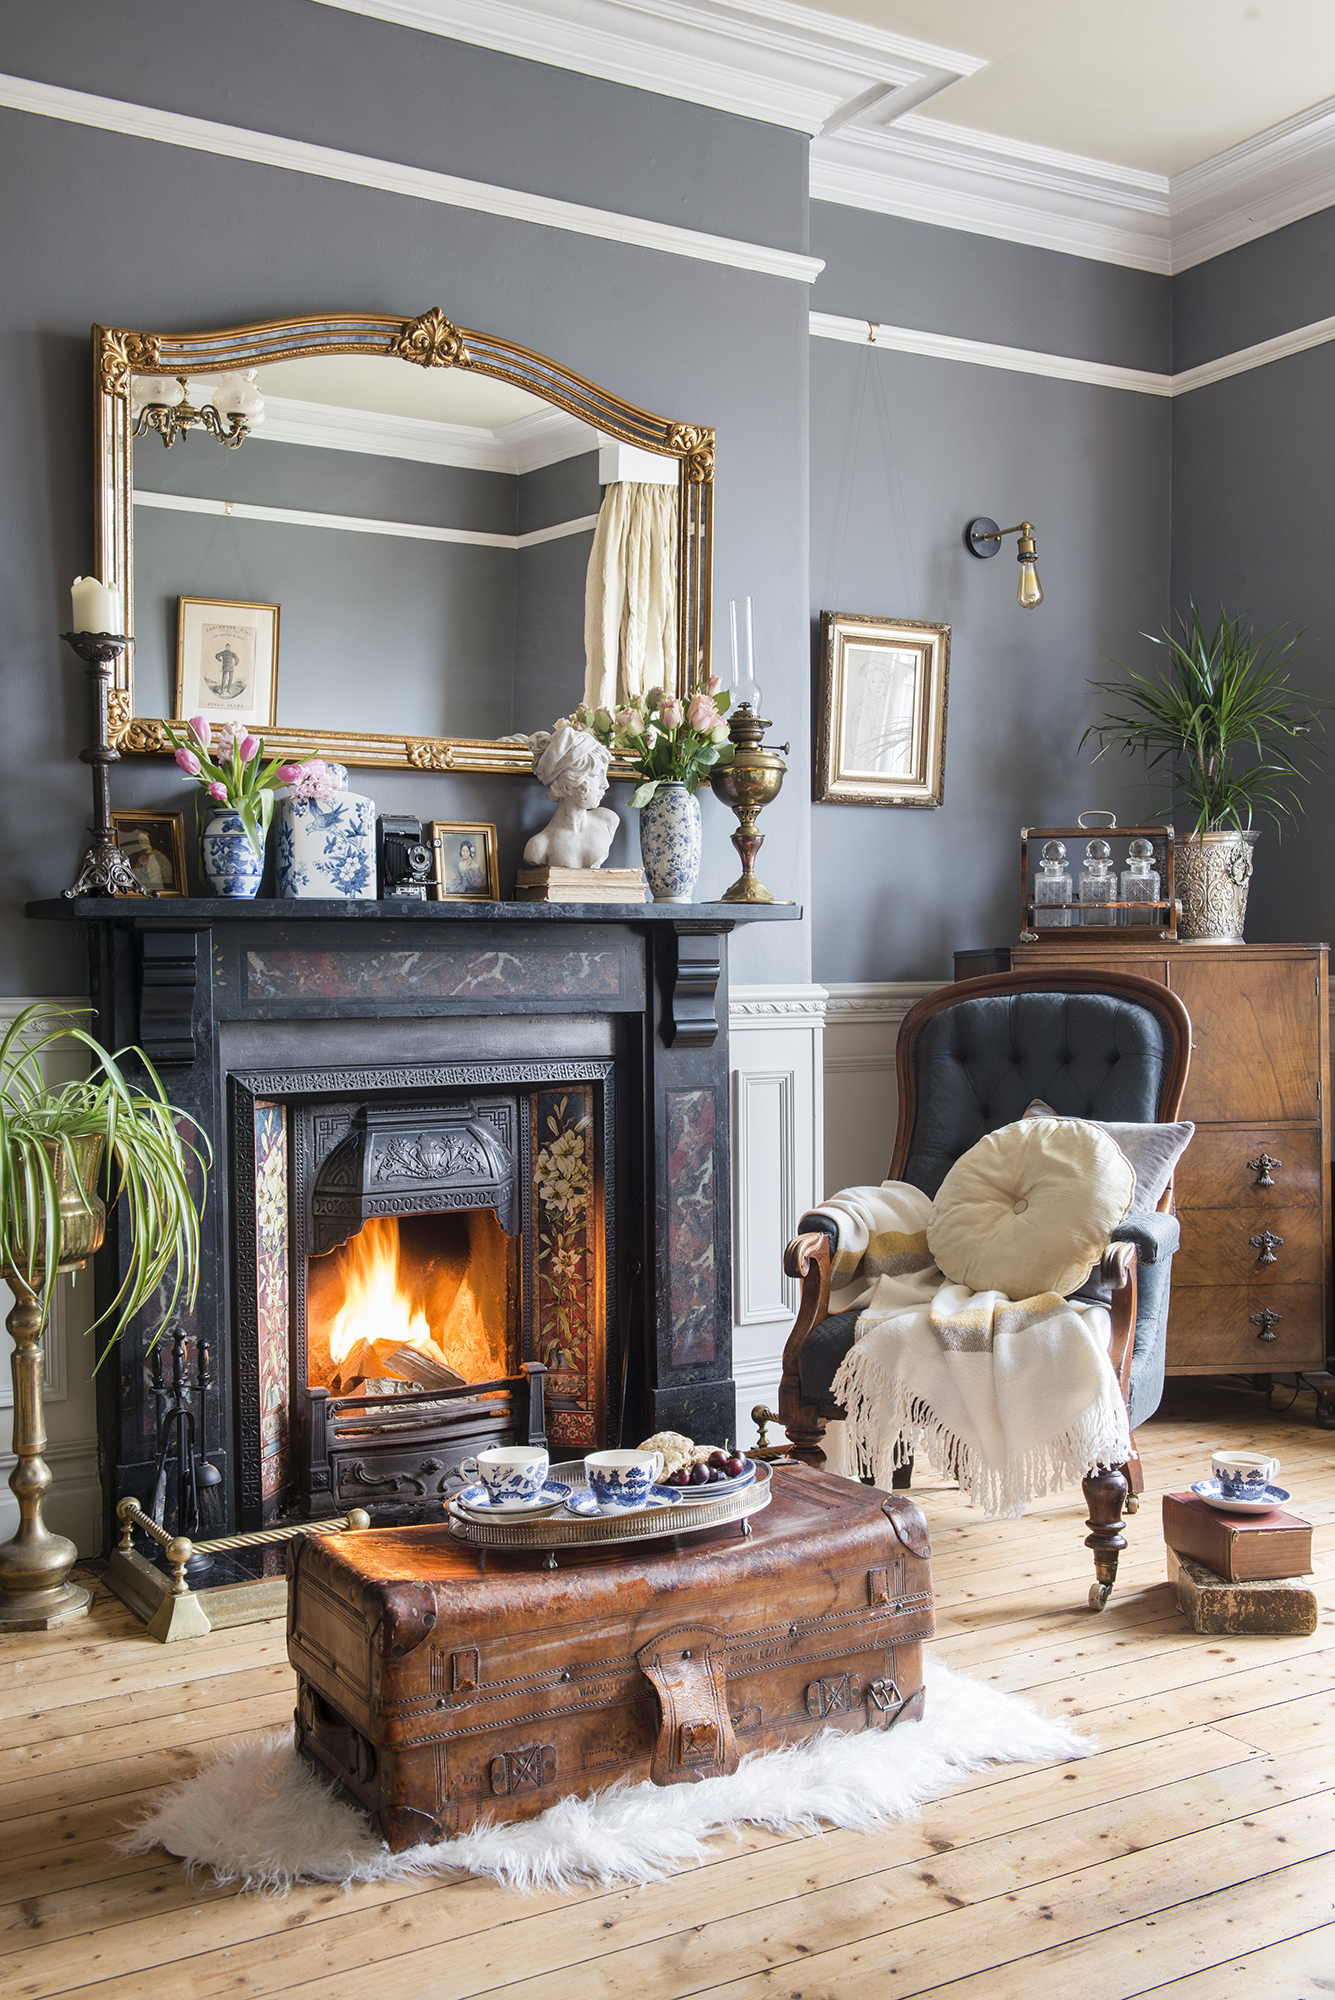 A grey living room with renovated Victorian home fireplace, large mirror over mantel and set of whiskey decanters in makeshift home bar within alcove area